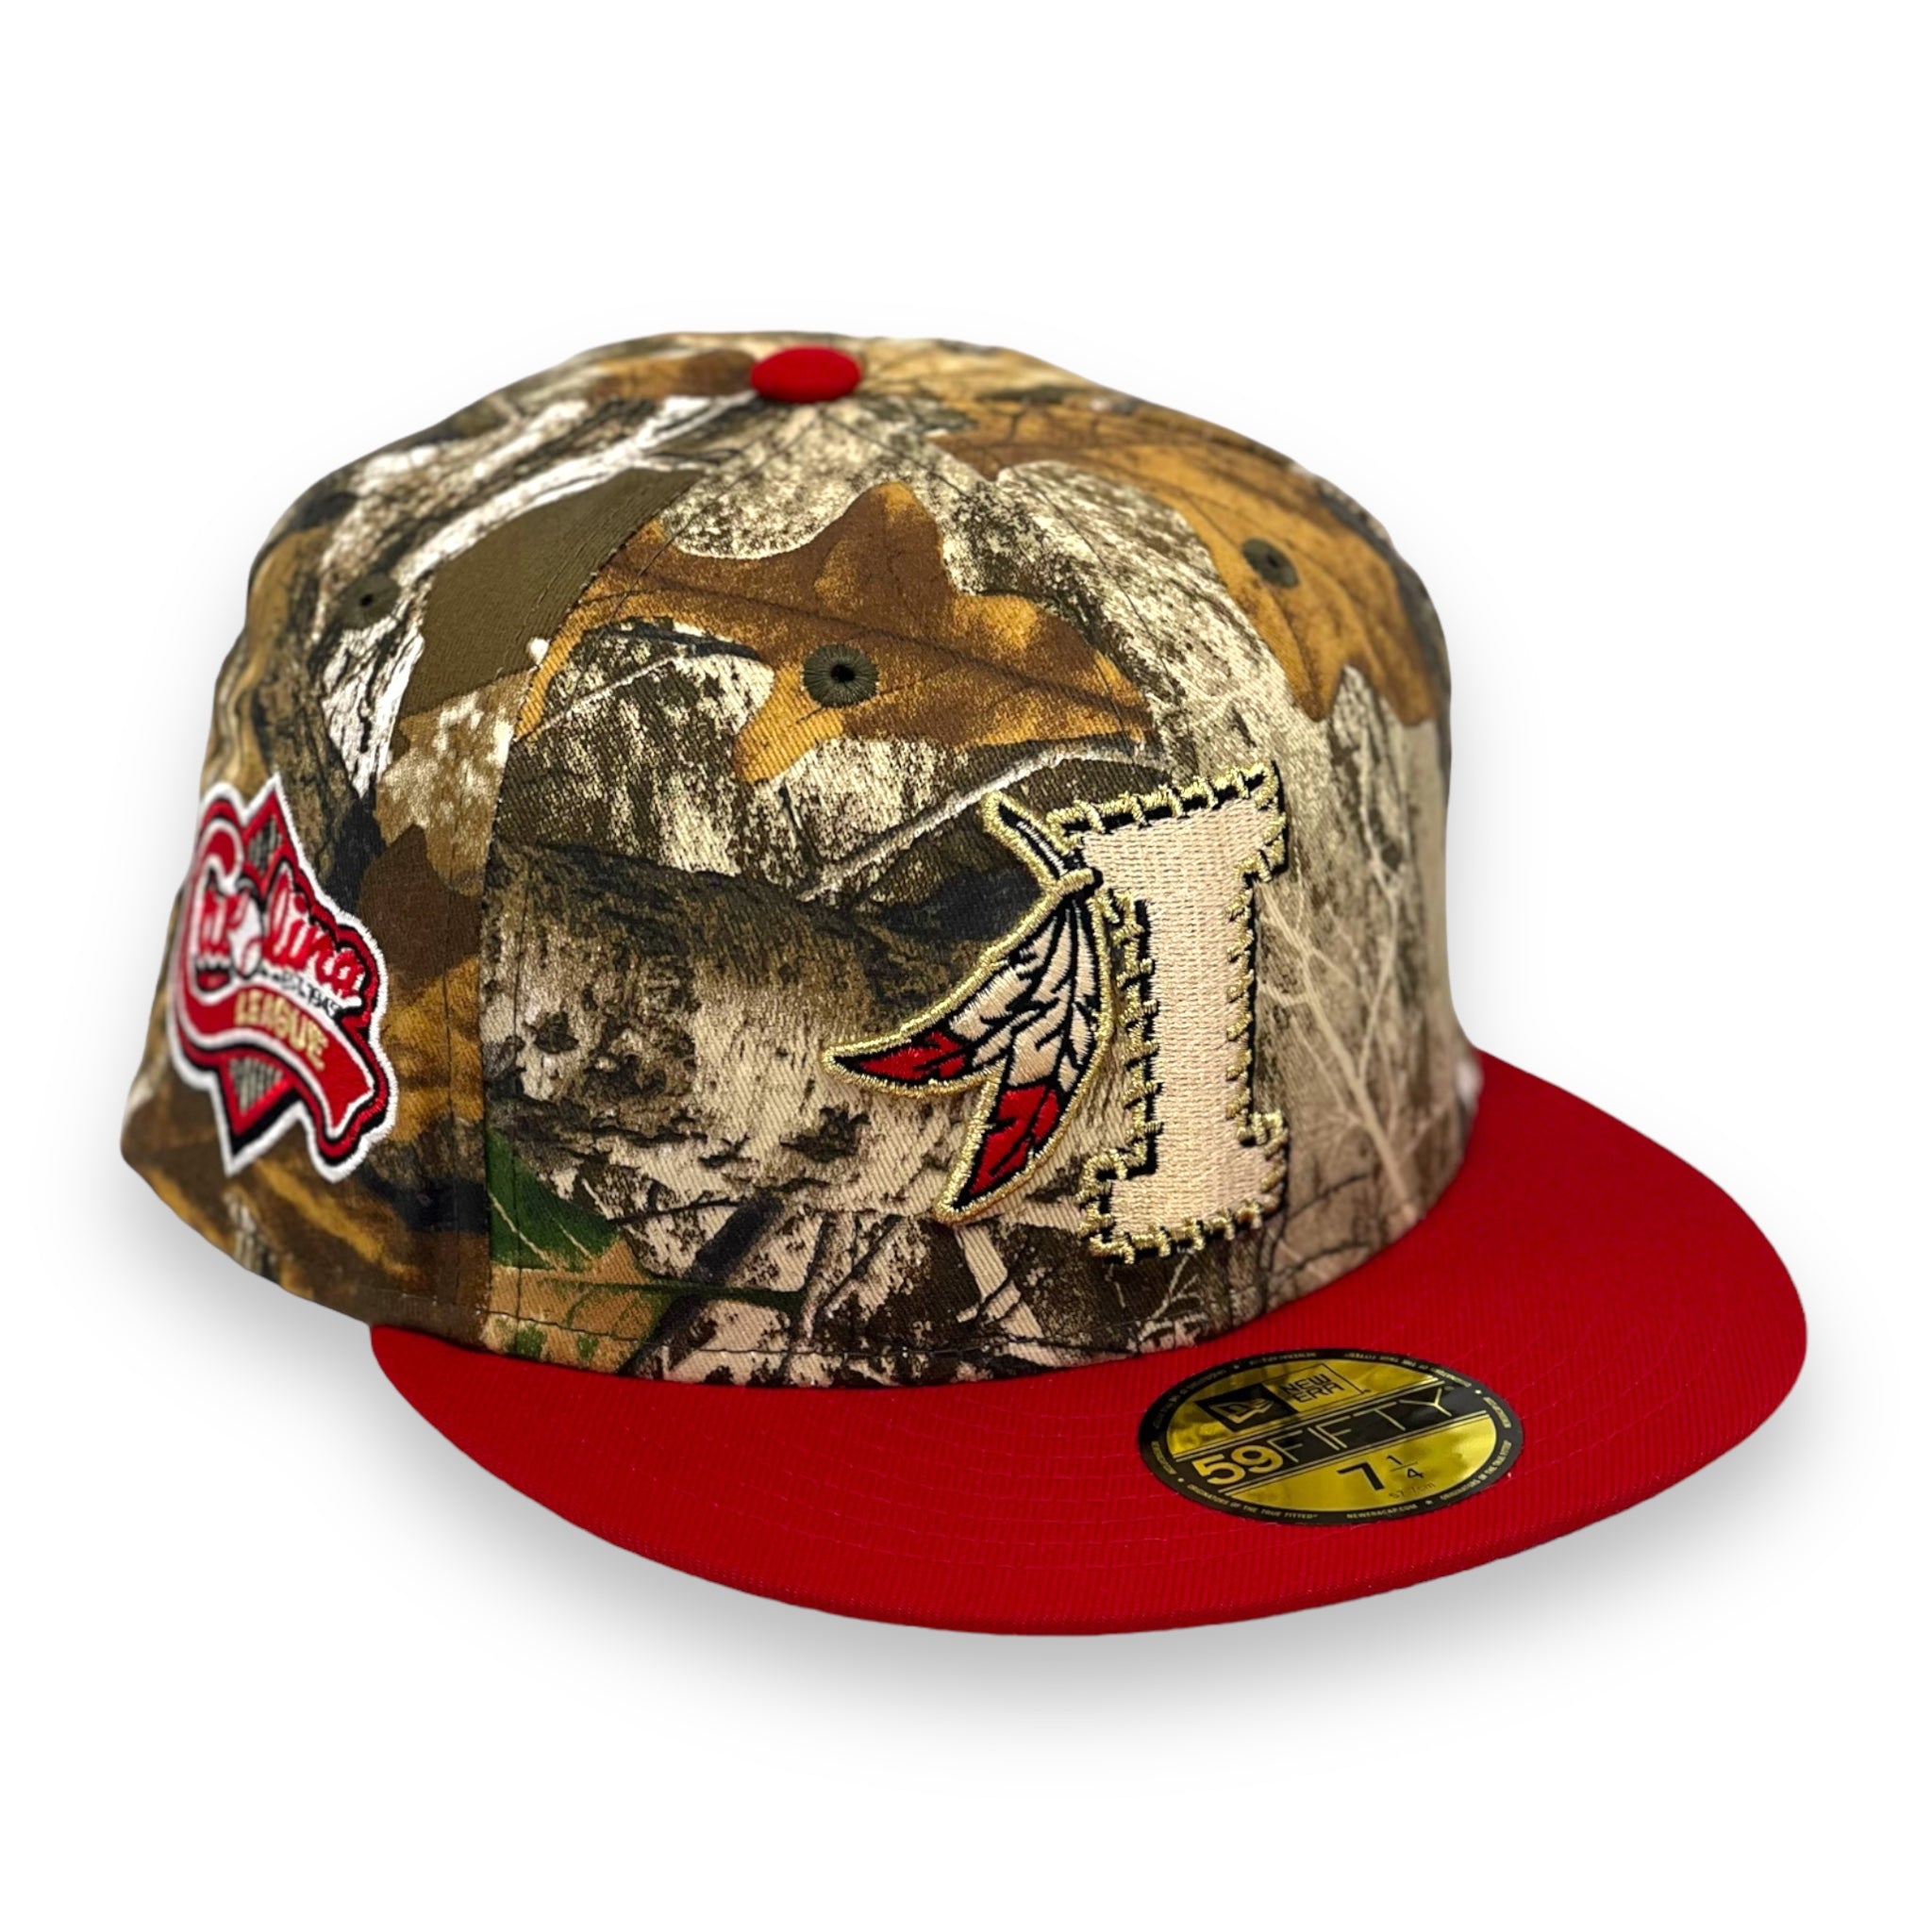 KINGSTON INDIANS (REAL TREE) (CAROLINA LEAGUE) NEW ERA 59FIFTY FITTED